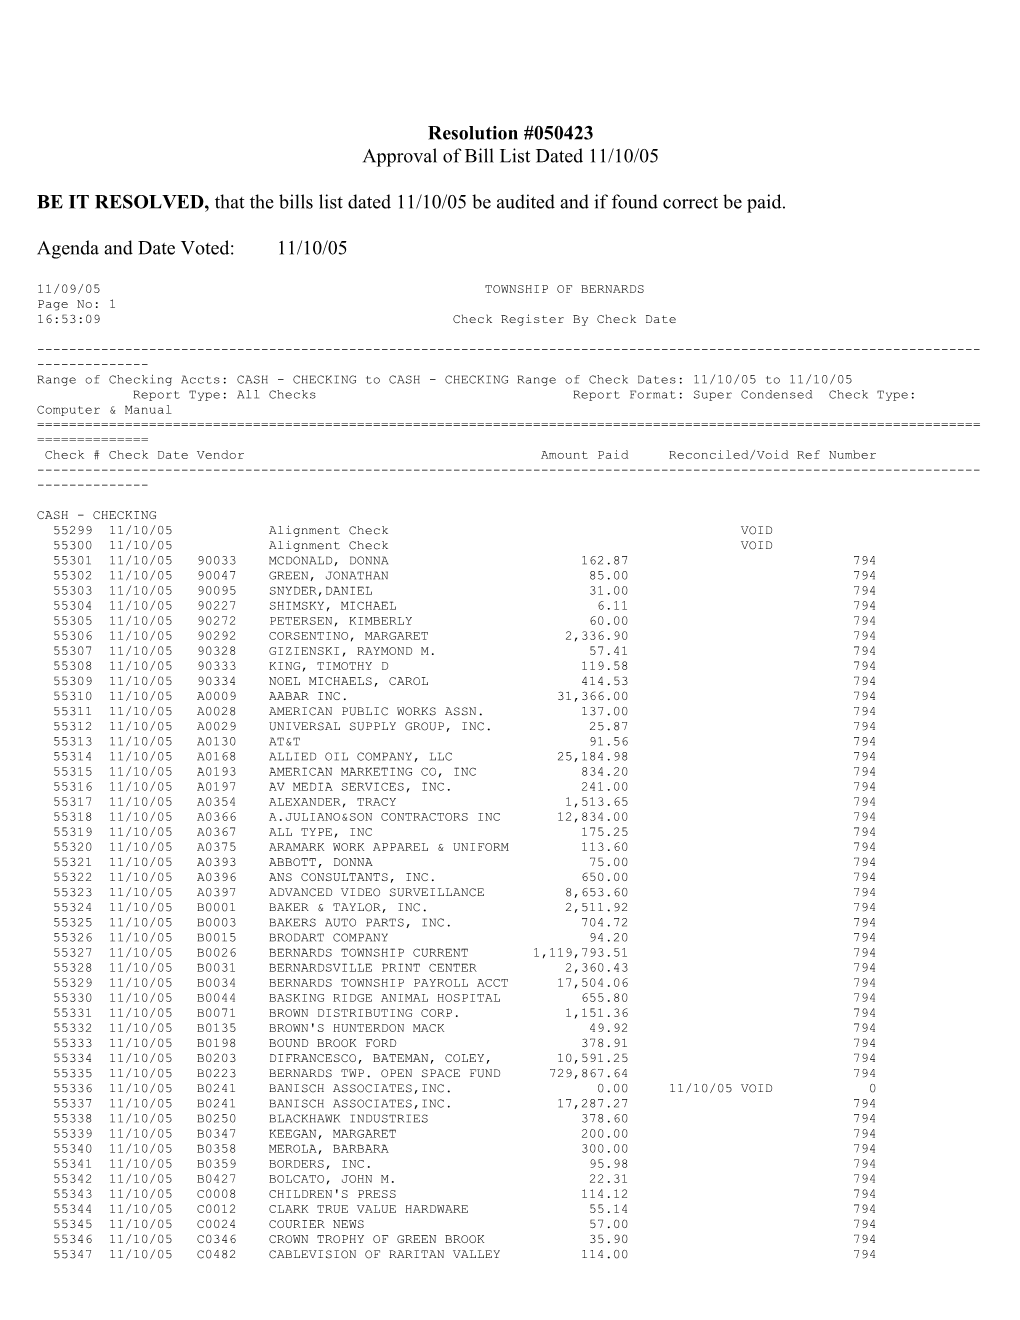 Approval of Bill List Dated 11/10/05